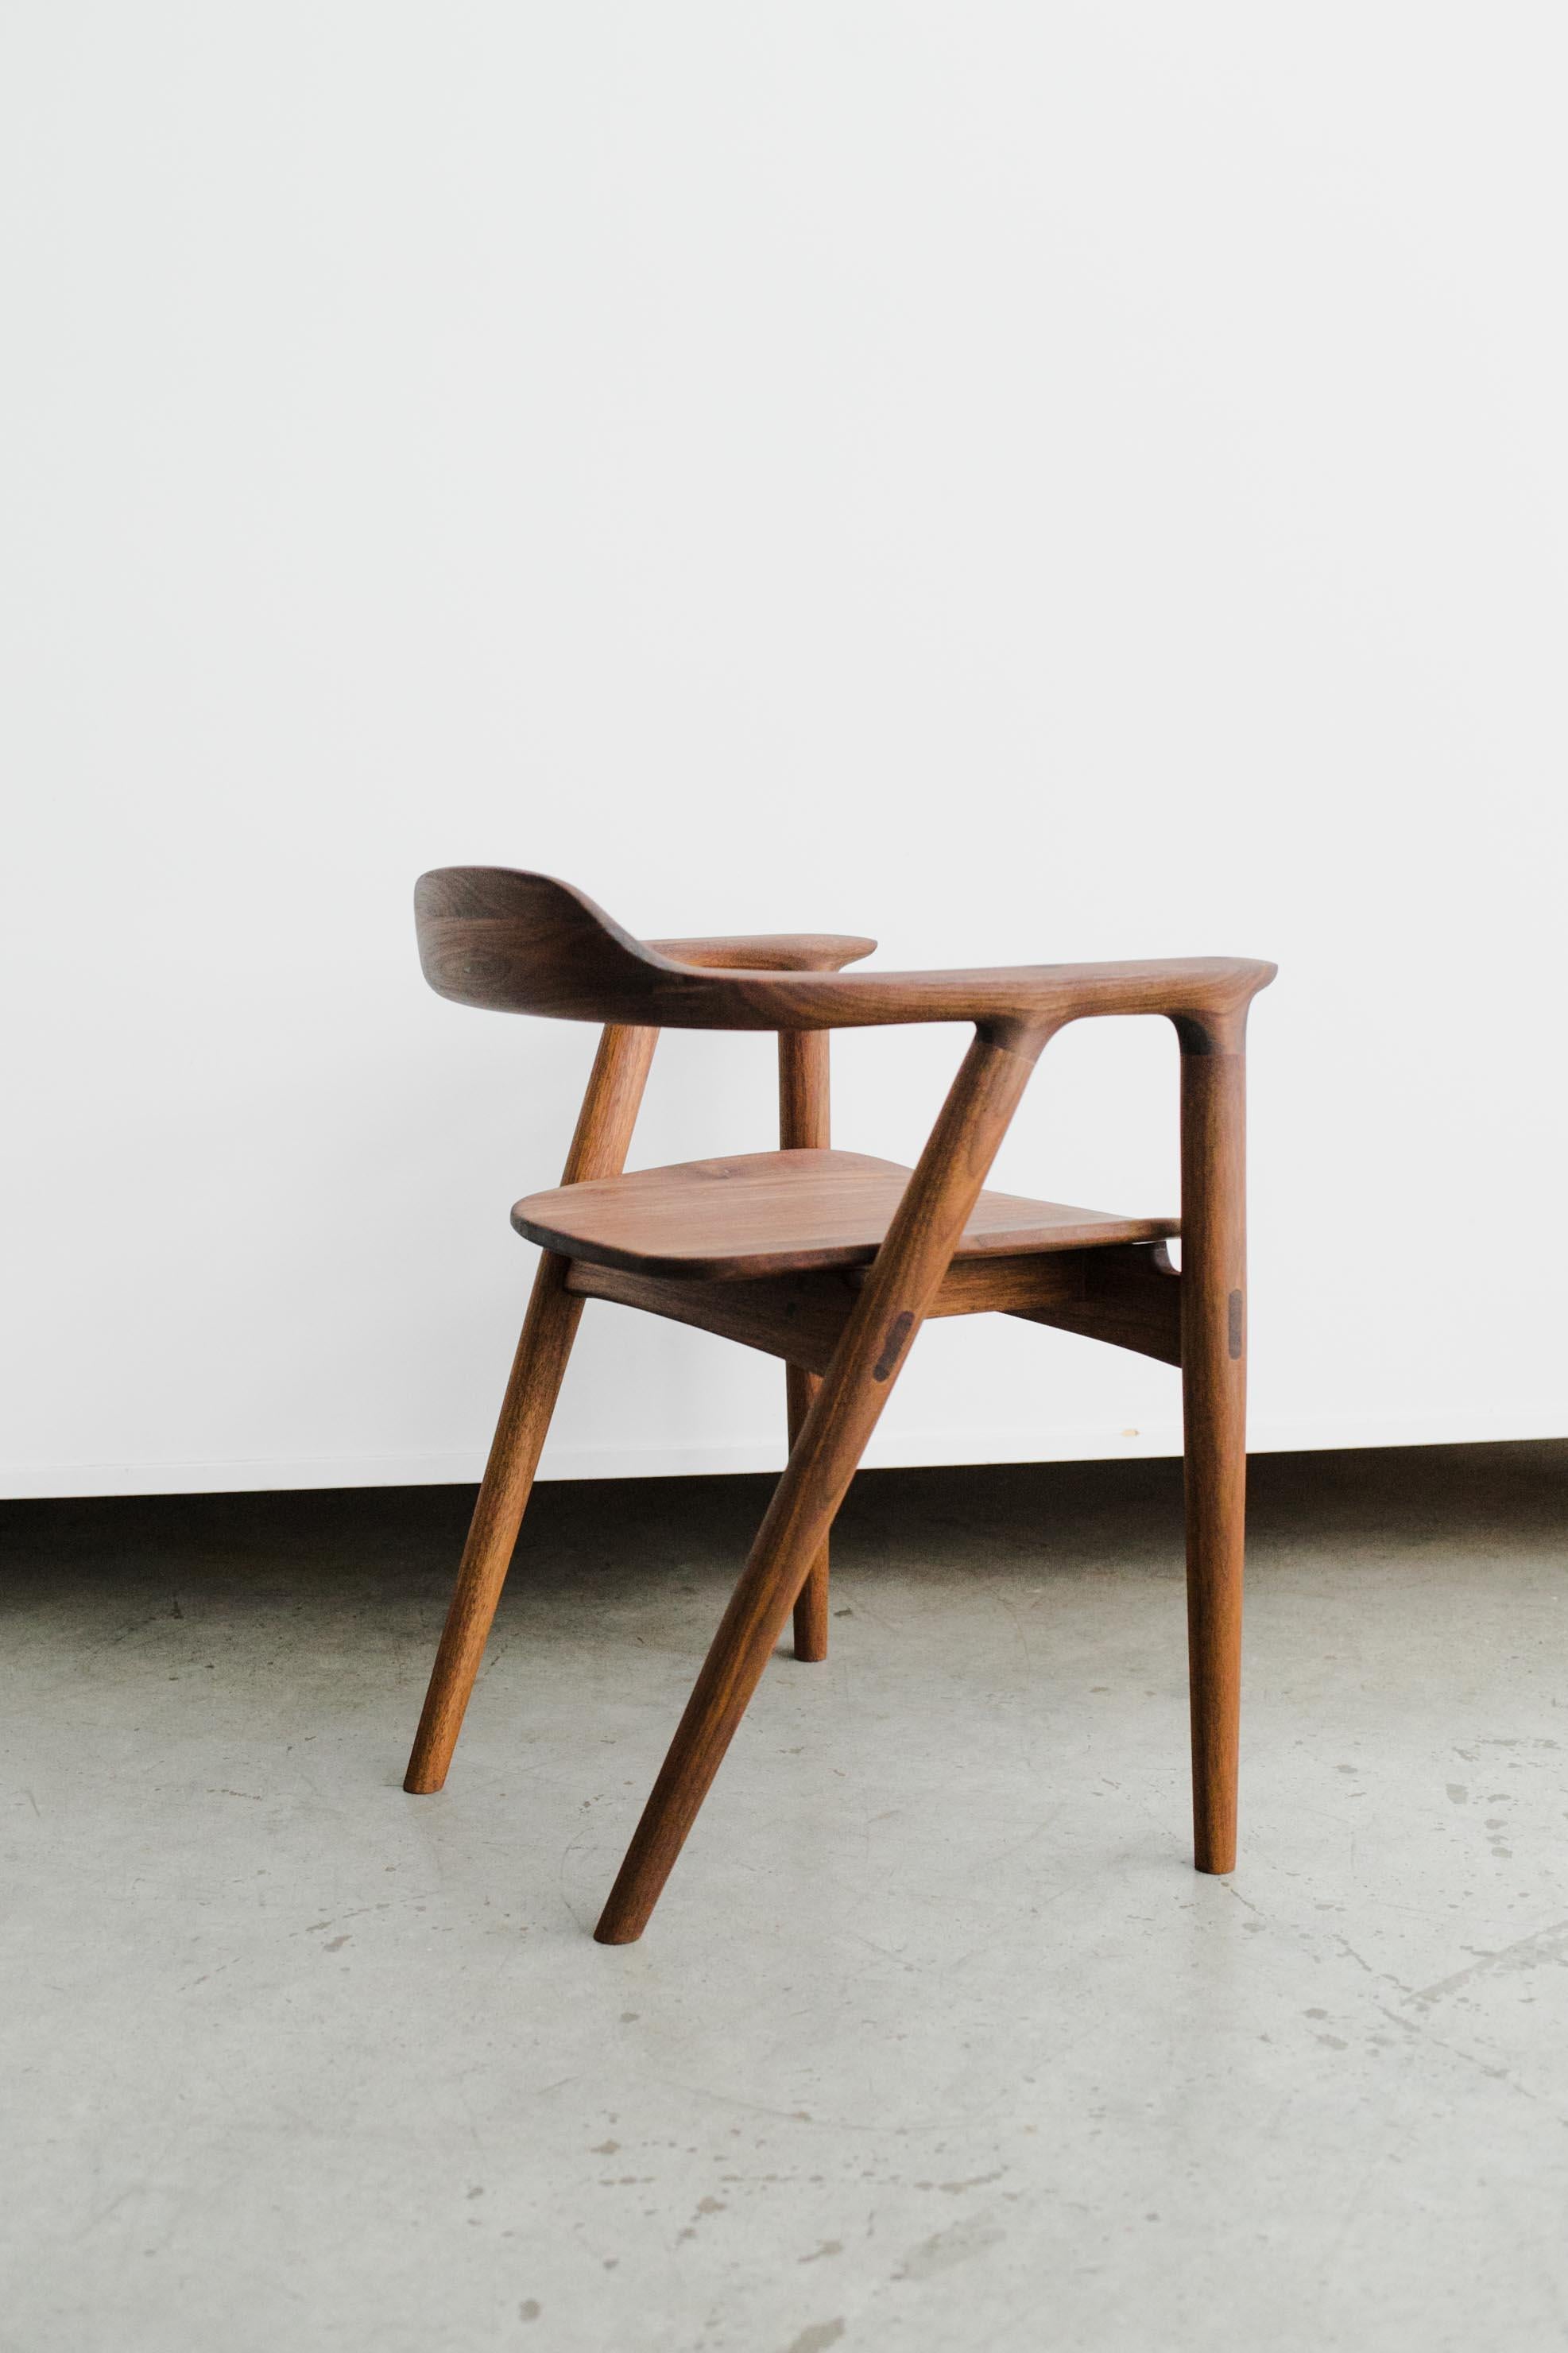 This minimal chair is a great addition to any contemporary dining room, or living room. The Bristol chair features a curved crest rail, wedged-tenon joinery, and hand-shaped curves that seamlessly blend the chair’s legs and arm rests. Subtle details